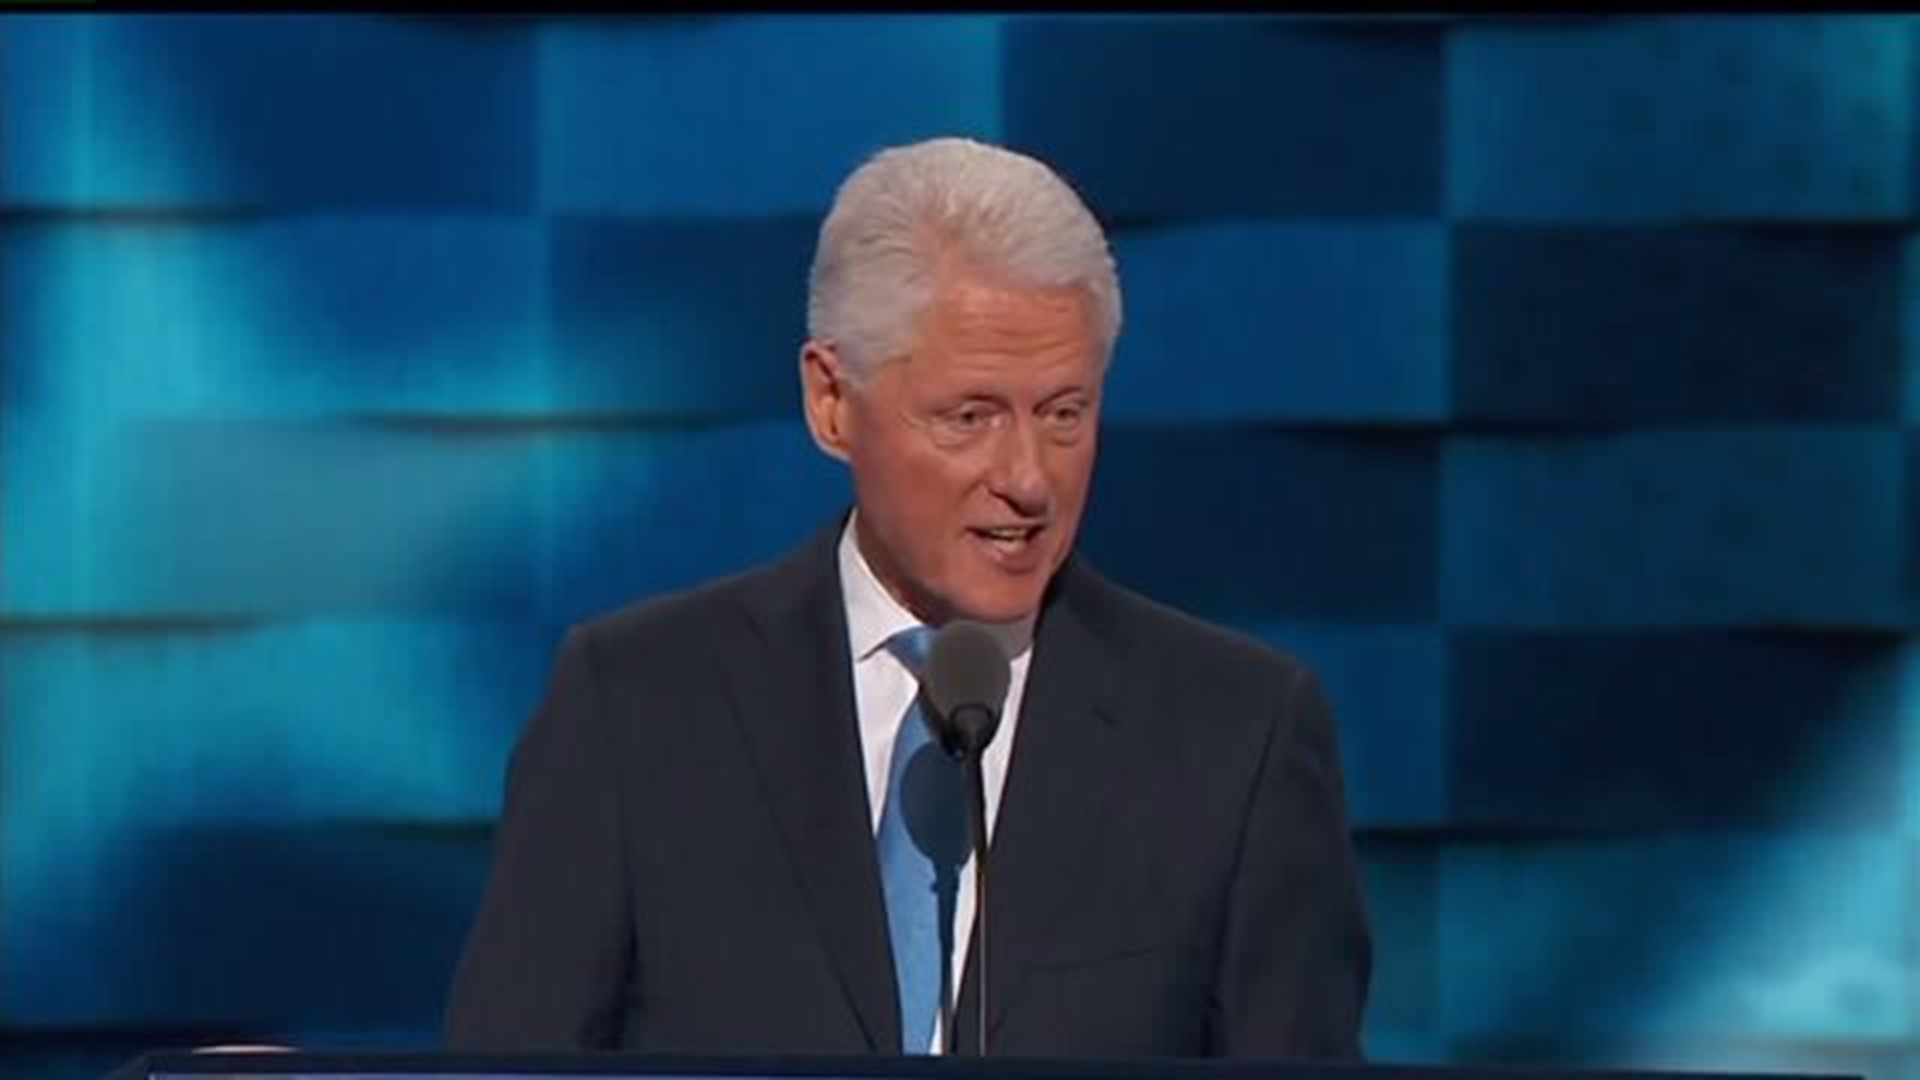 Bill Clinton uses tax money for foundation